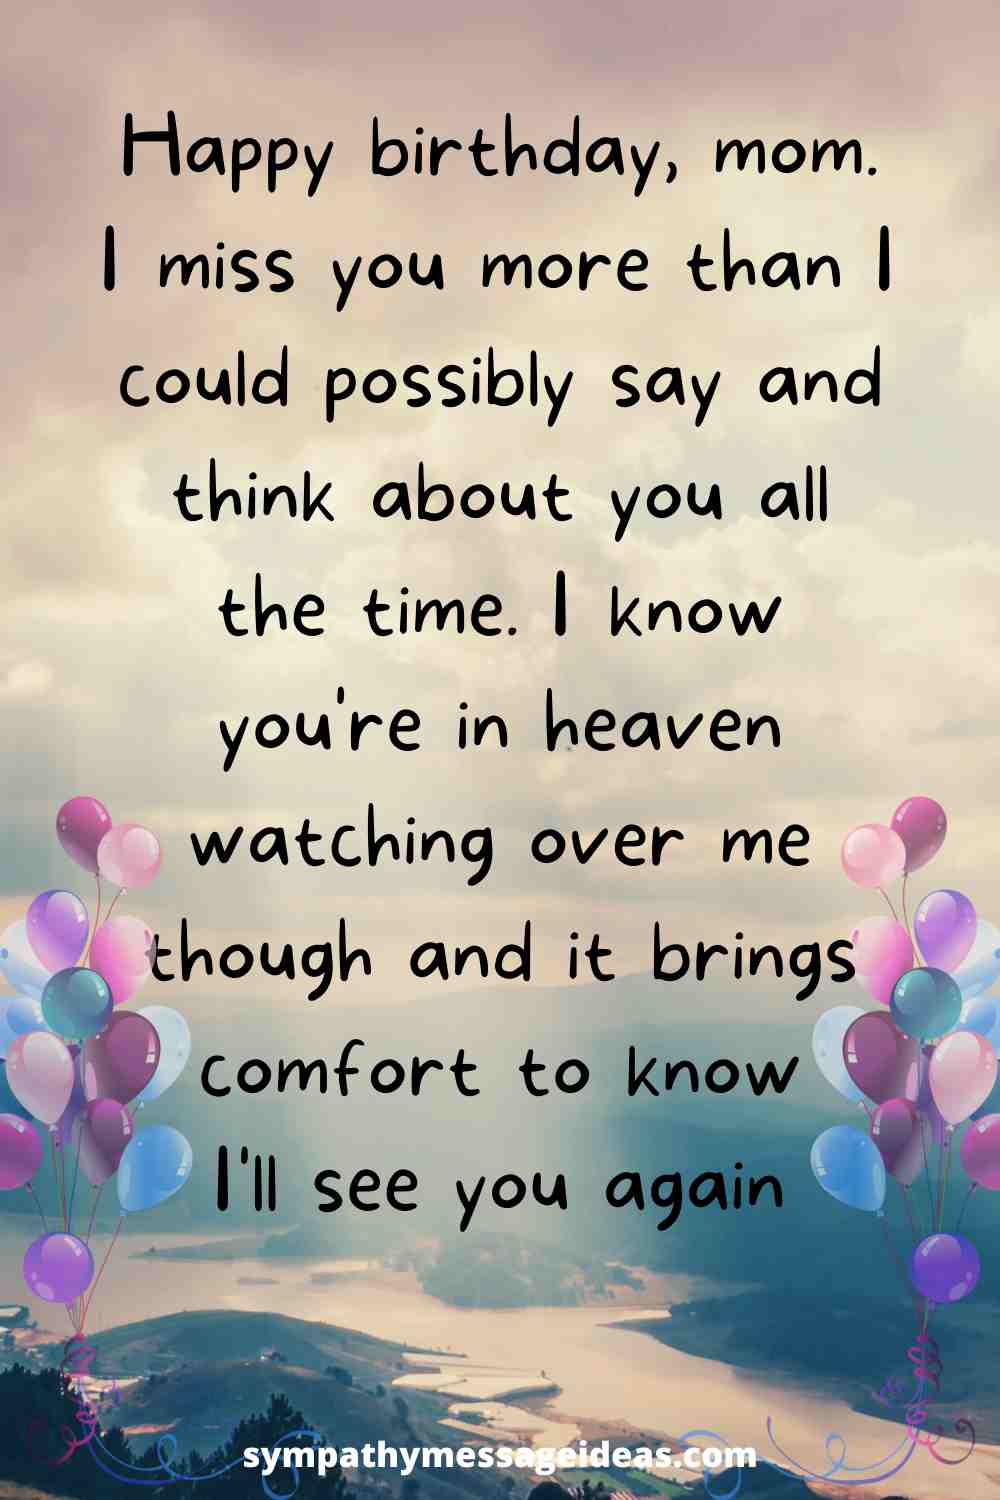 missing you in heaven mom